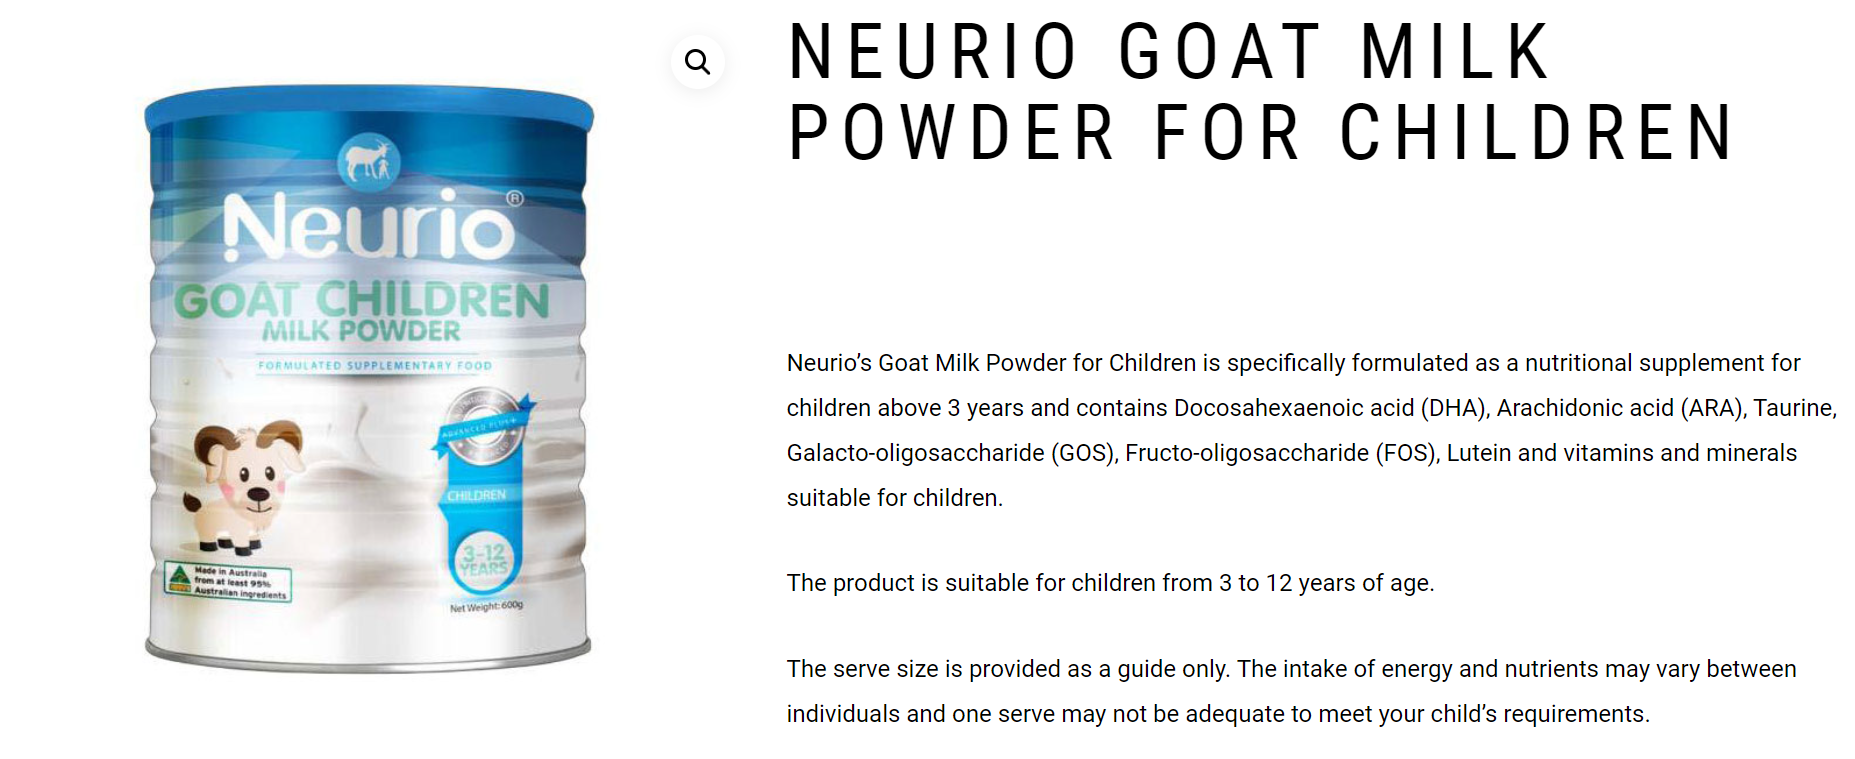 (Source: JAT) A look at one of the company's existing milk powder products for children 